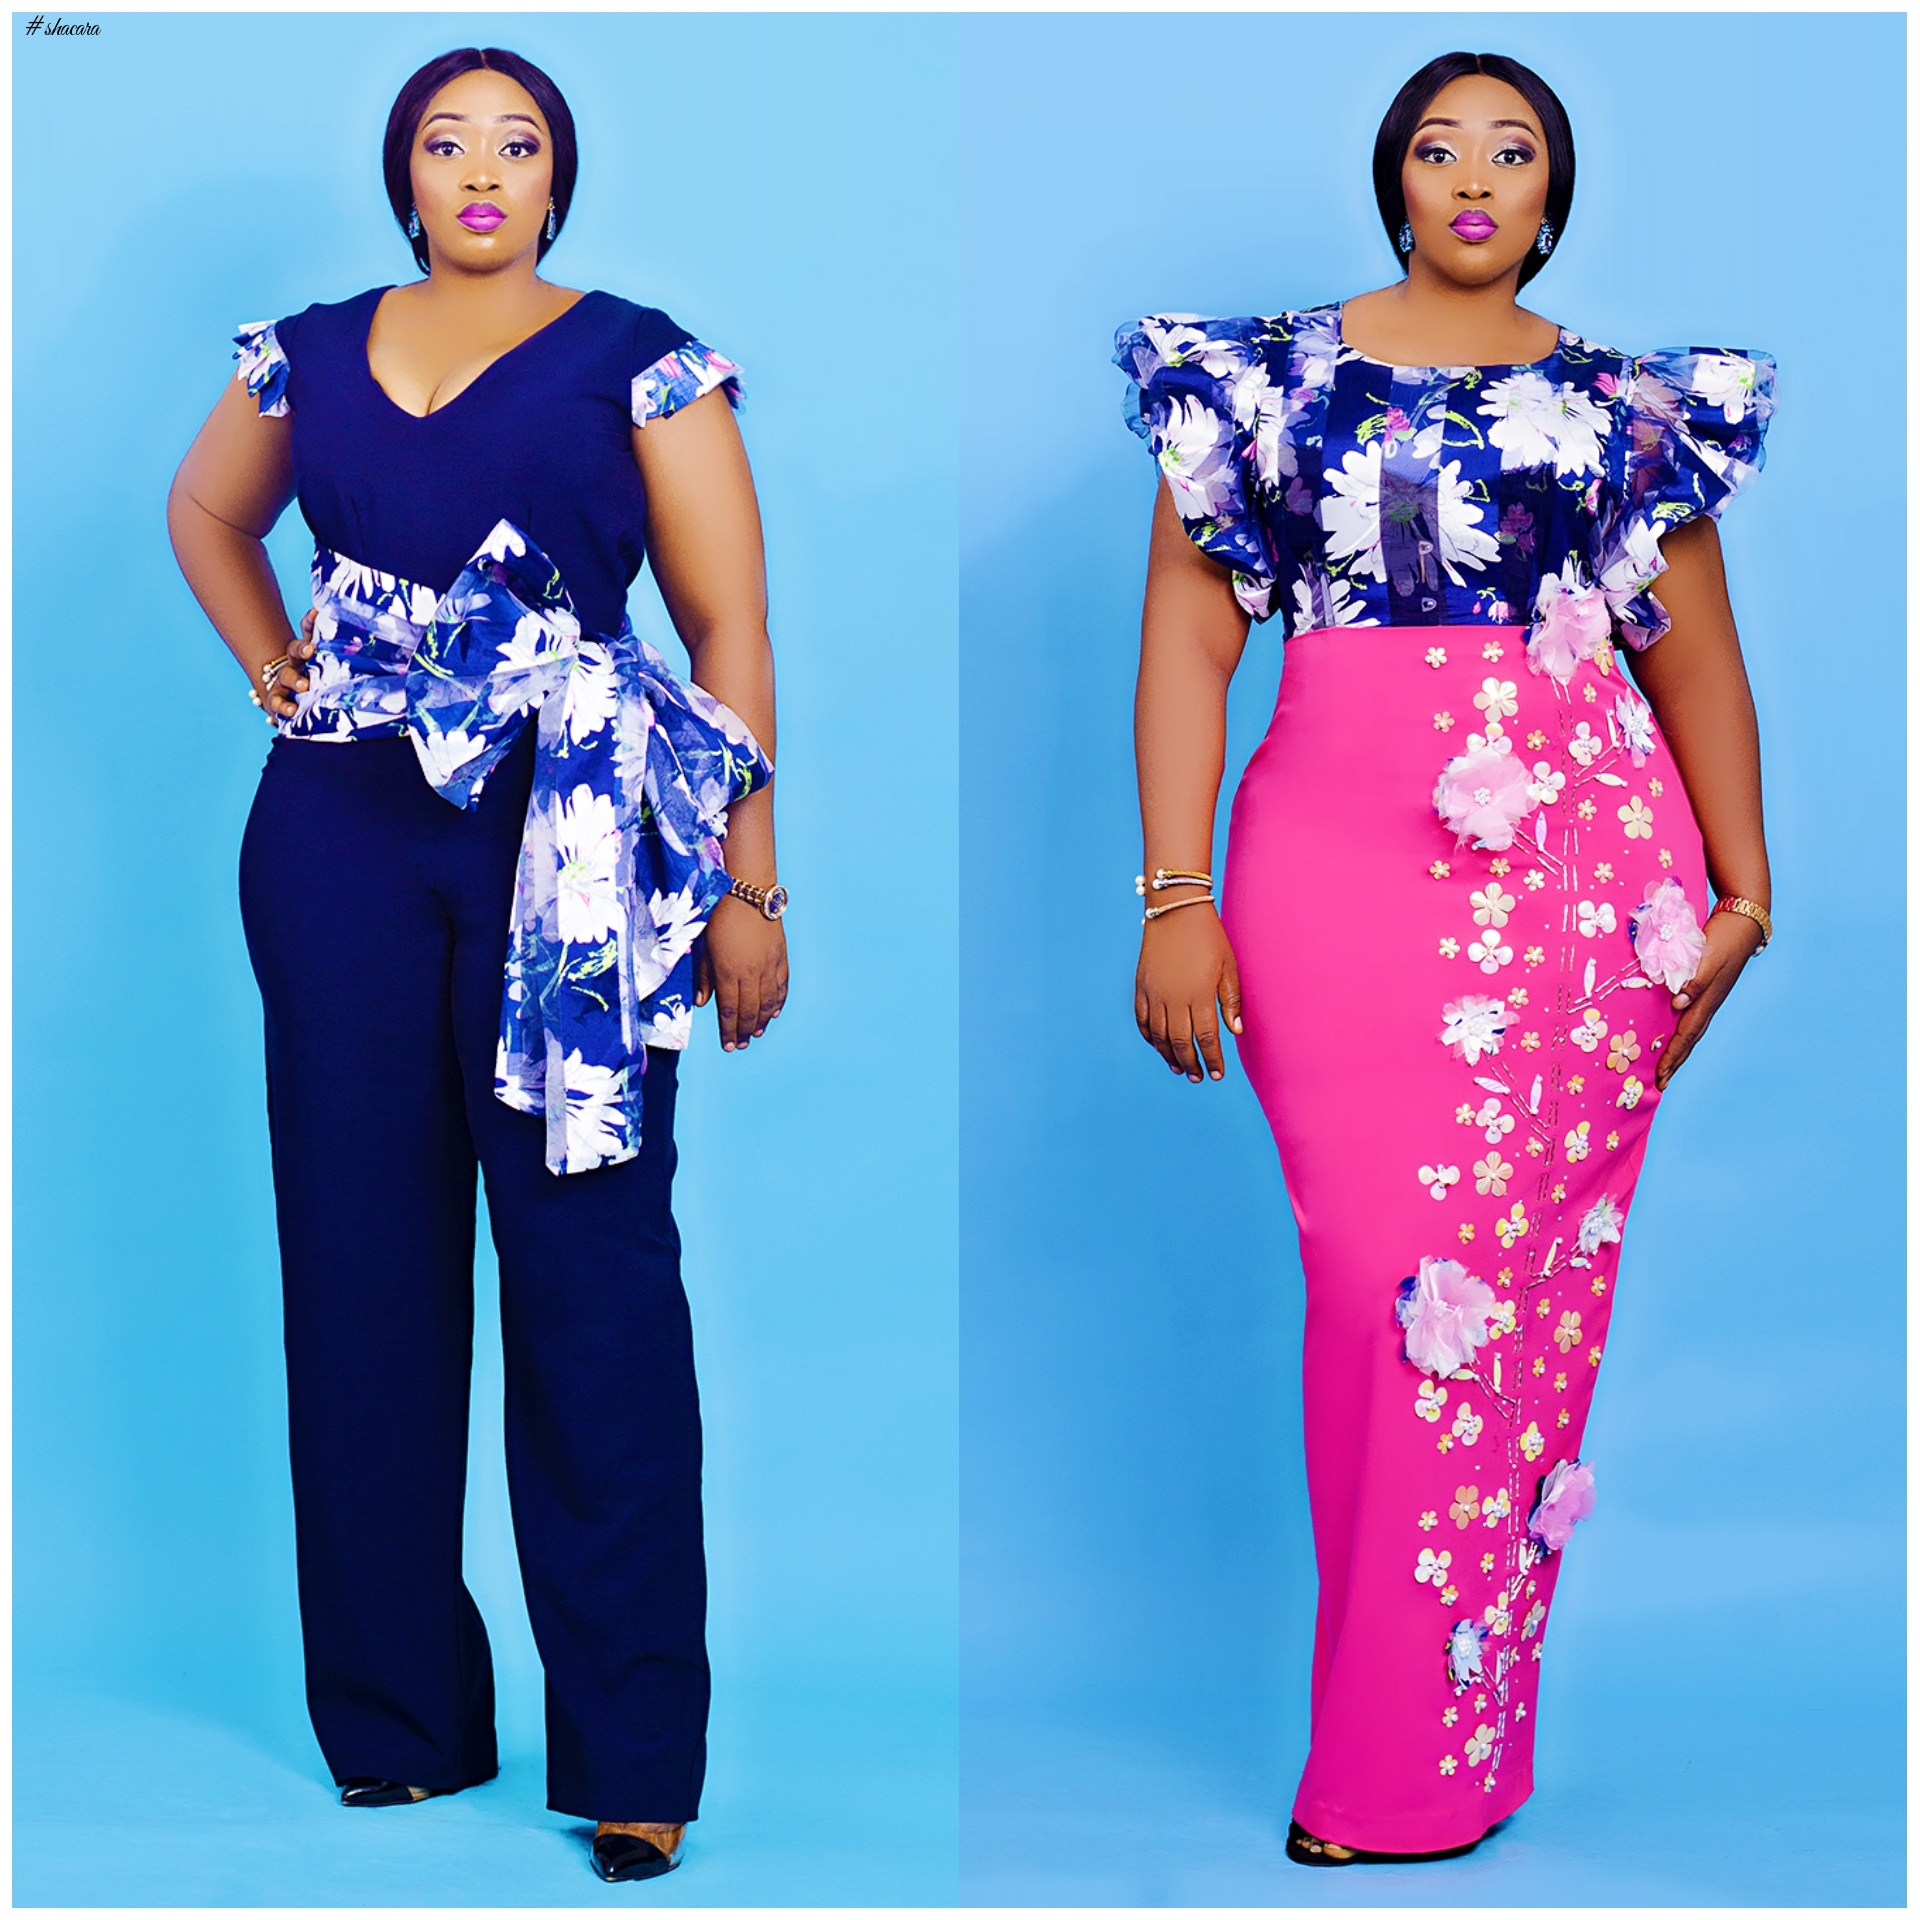 Plus Size Brand Makioba Releases Its SS17 Mid-Season Collection ‘Efflorescence’